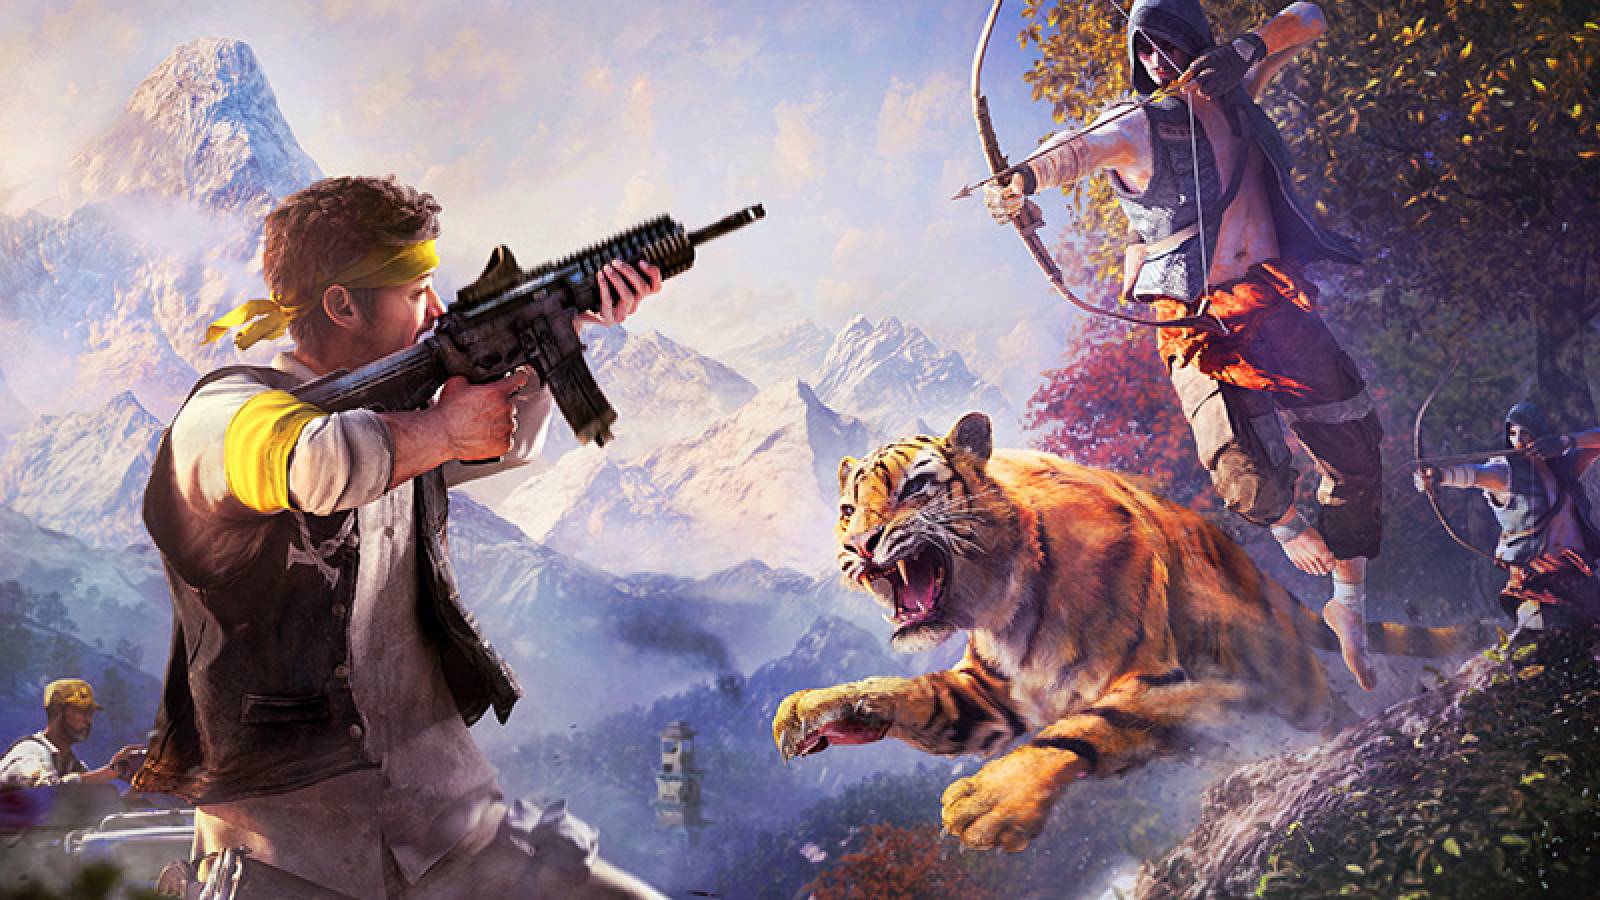 Plot Far Cry 4: Tragedy of the Ghale family